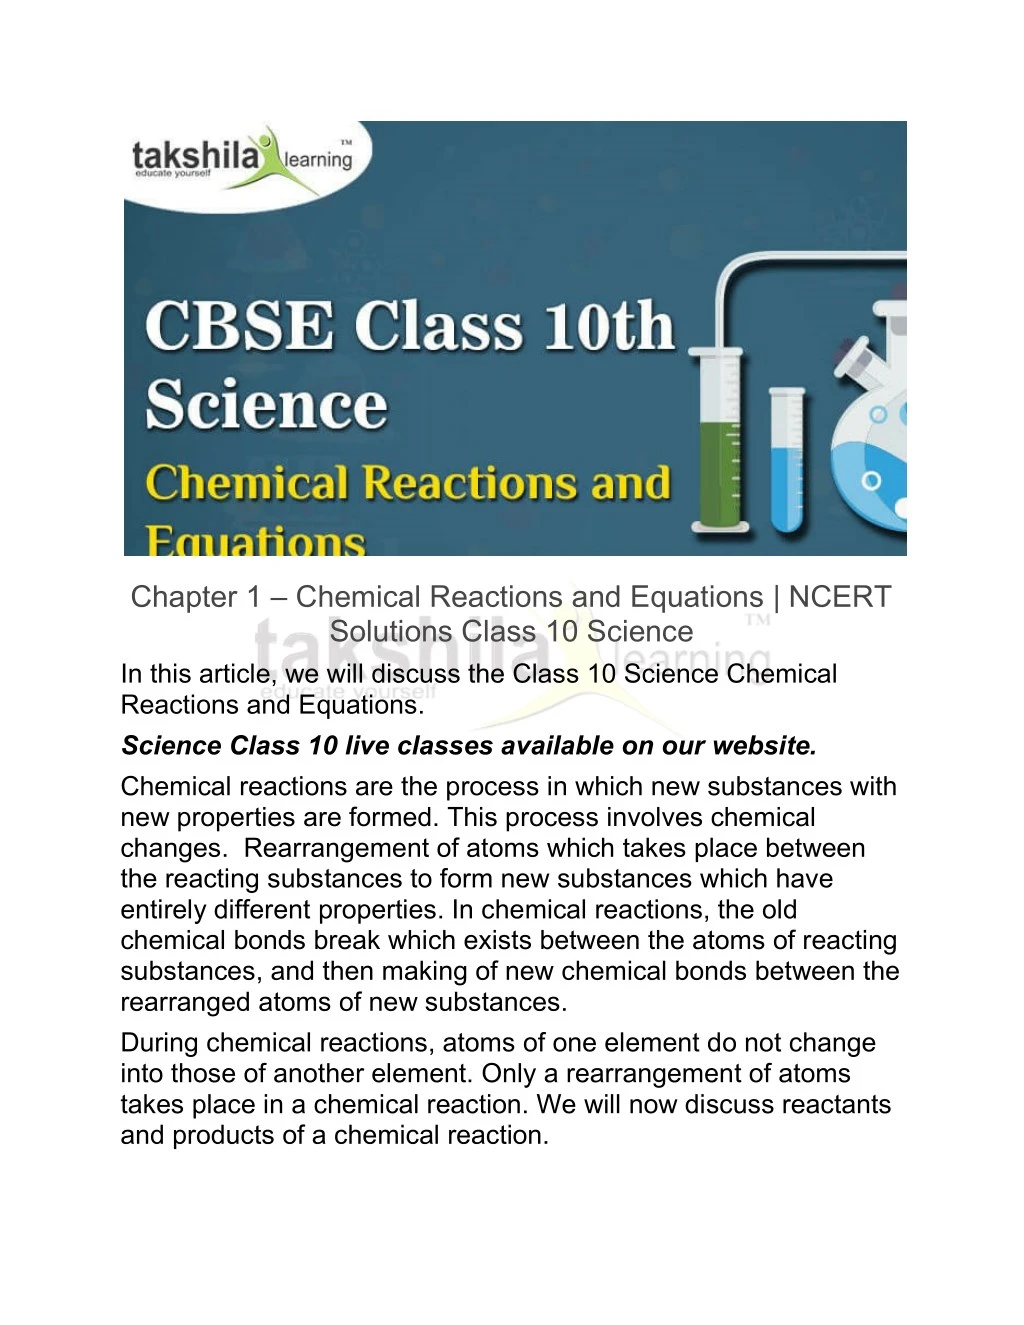 chapter 1 chemical reactions and equations ncert